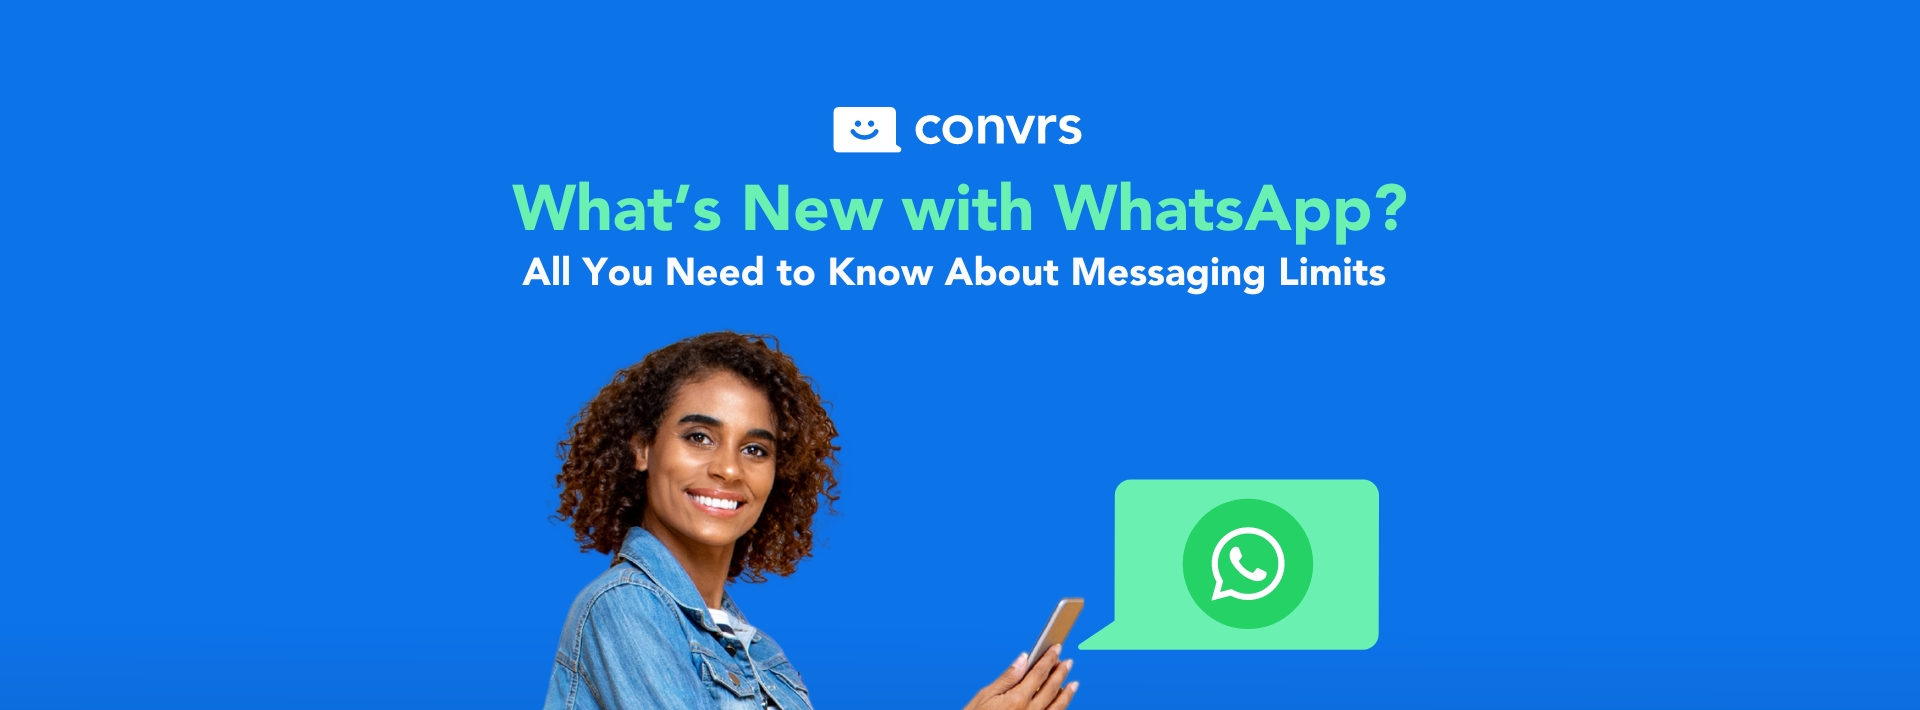 Woman using phone with WhatsApp icon in a message bubble